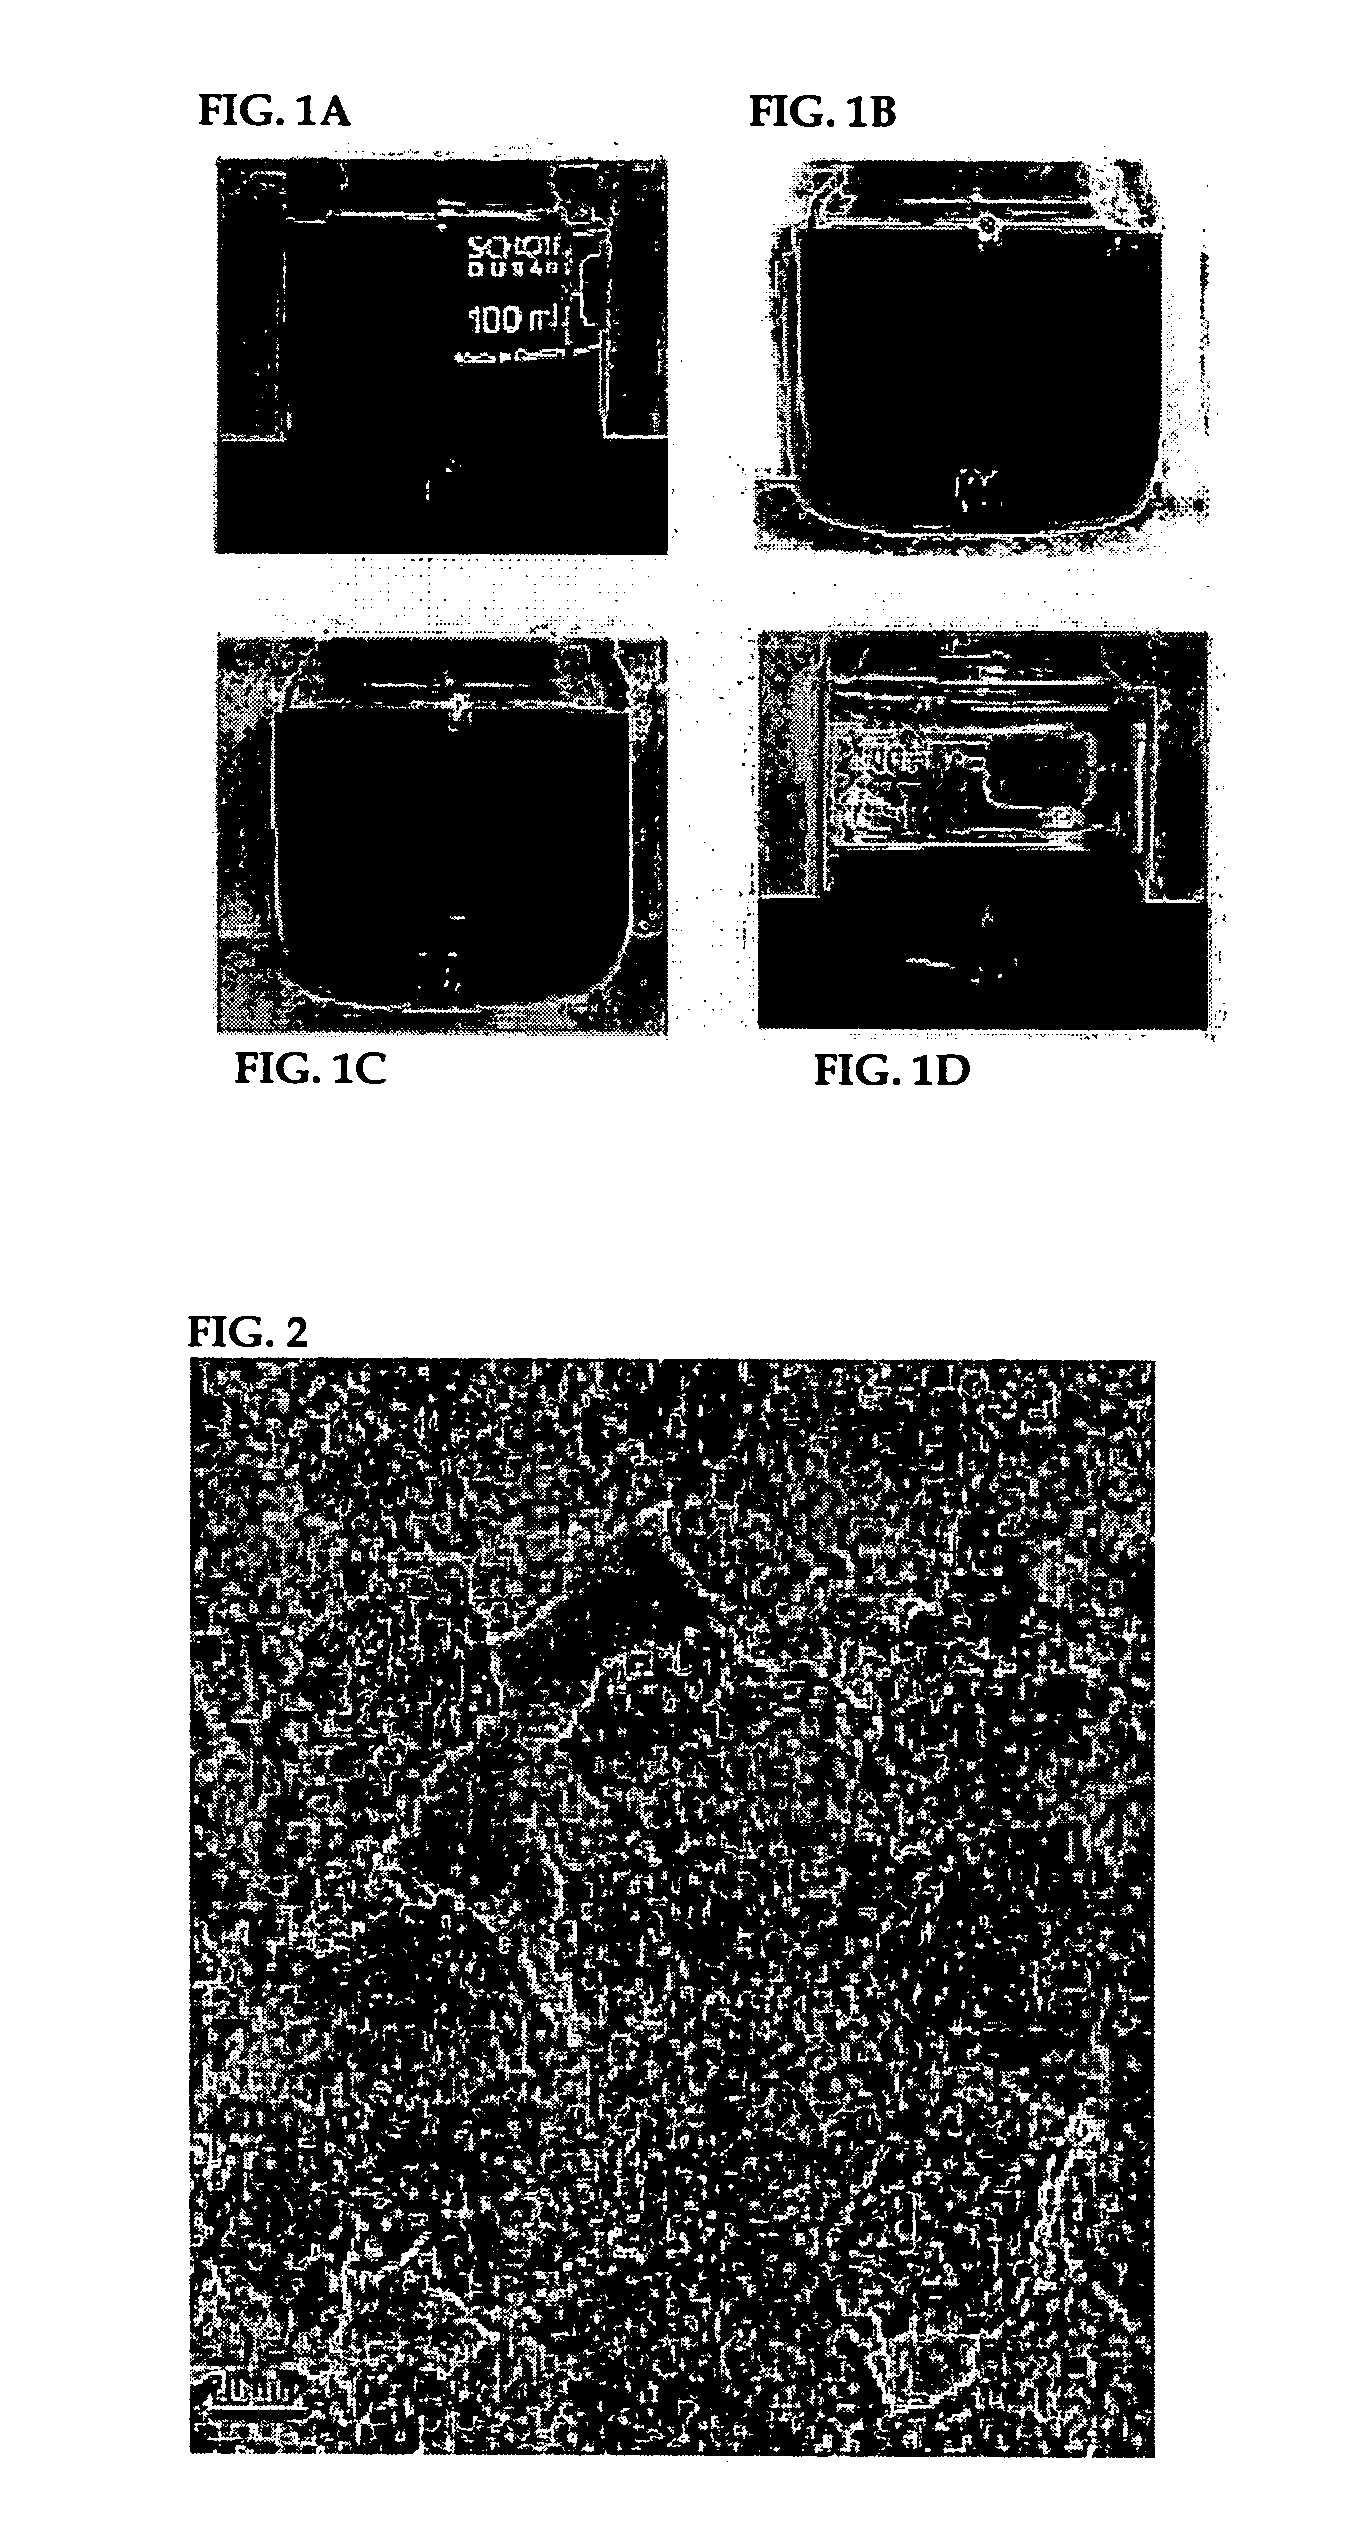 Method for preparation of highly dispersed supported platinum catalyst